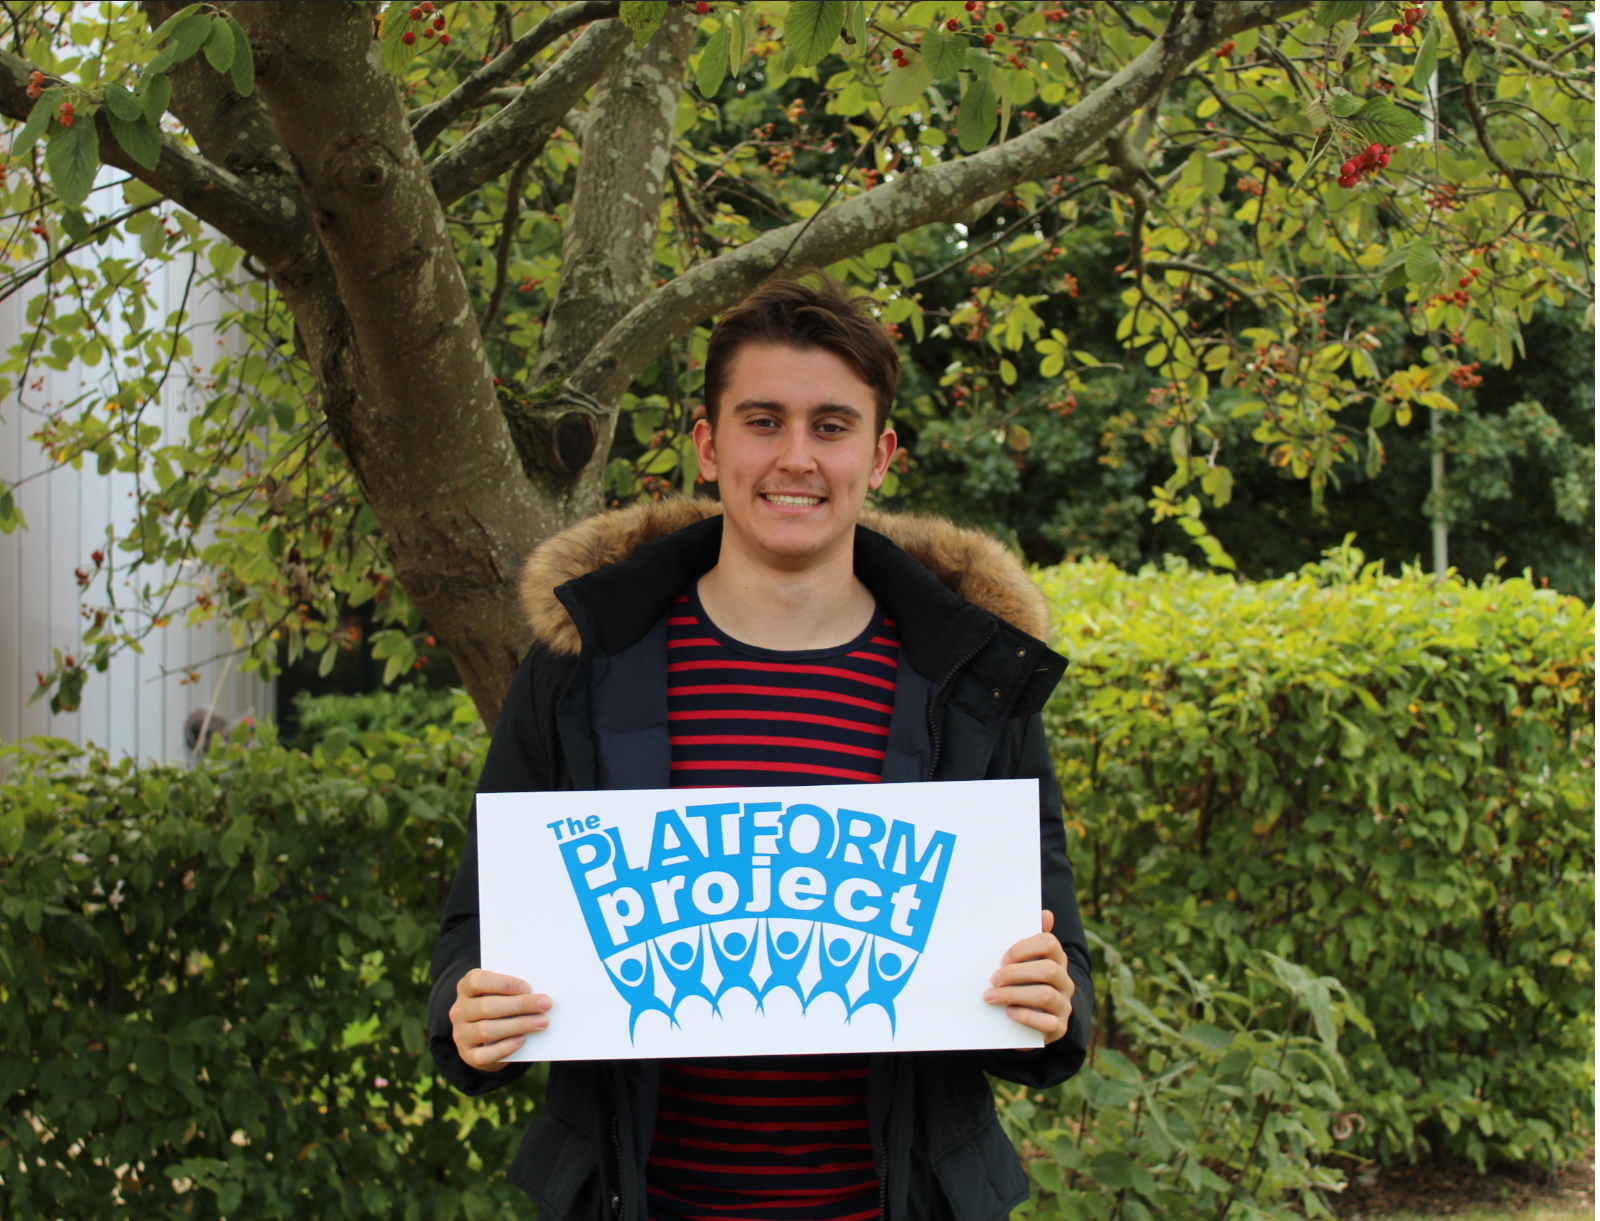 TEENAGE INTERN URGES OTHER YOUNG PEOPLE TO EMBRACE WORKING WITH THE PLATFORM PROJECT